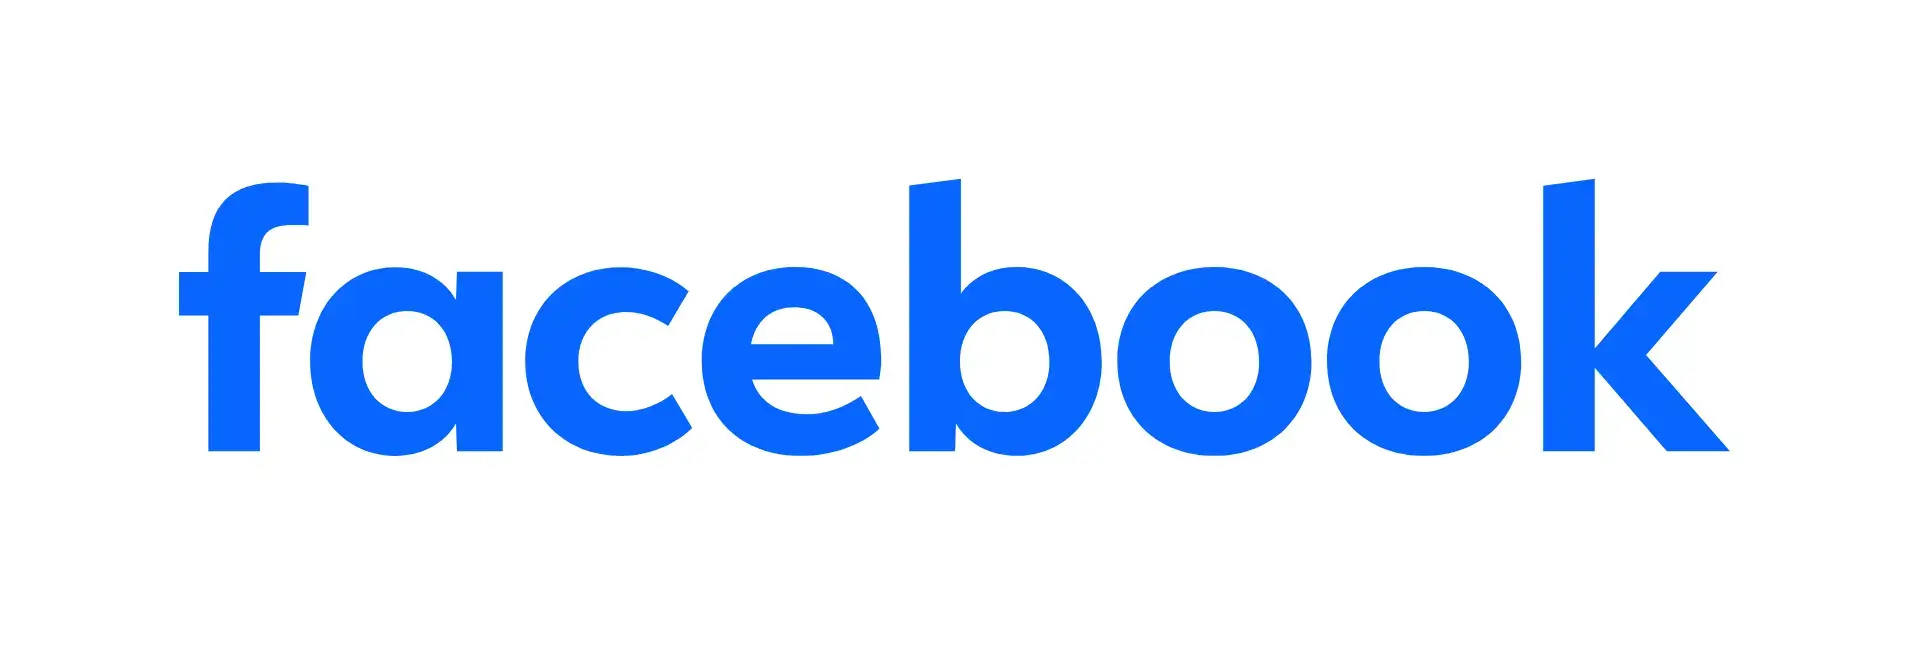 Facebook blue text logo with white background.